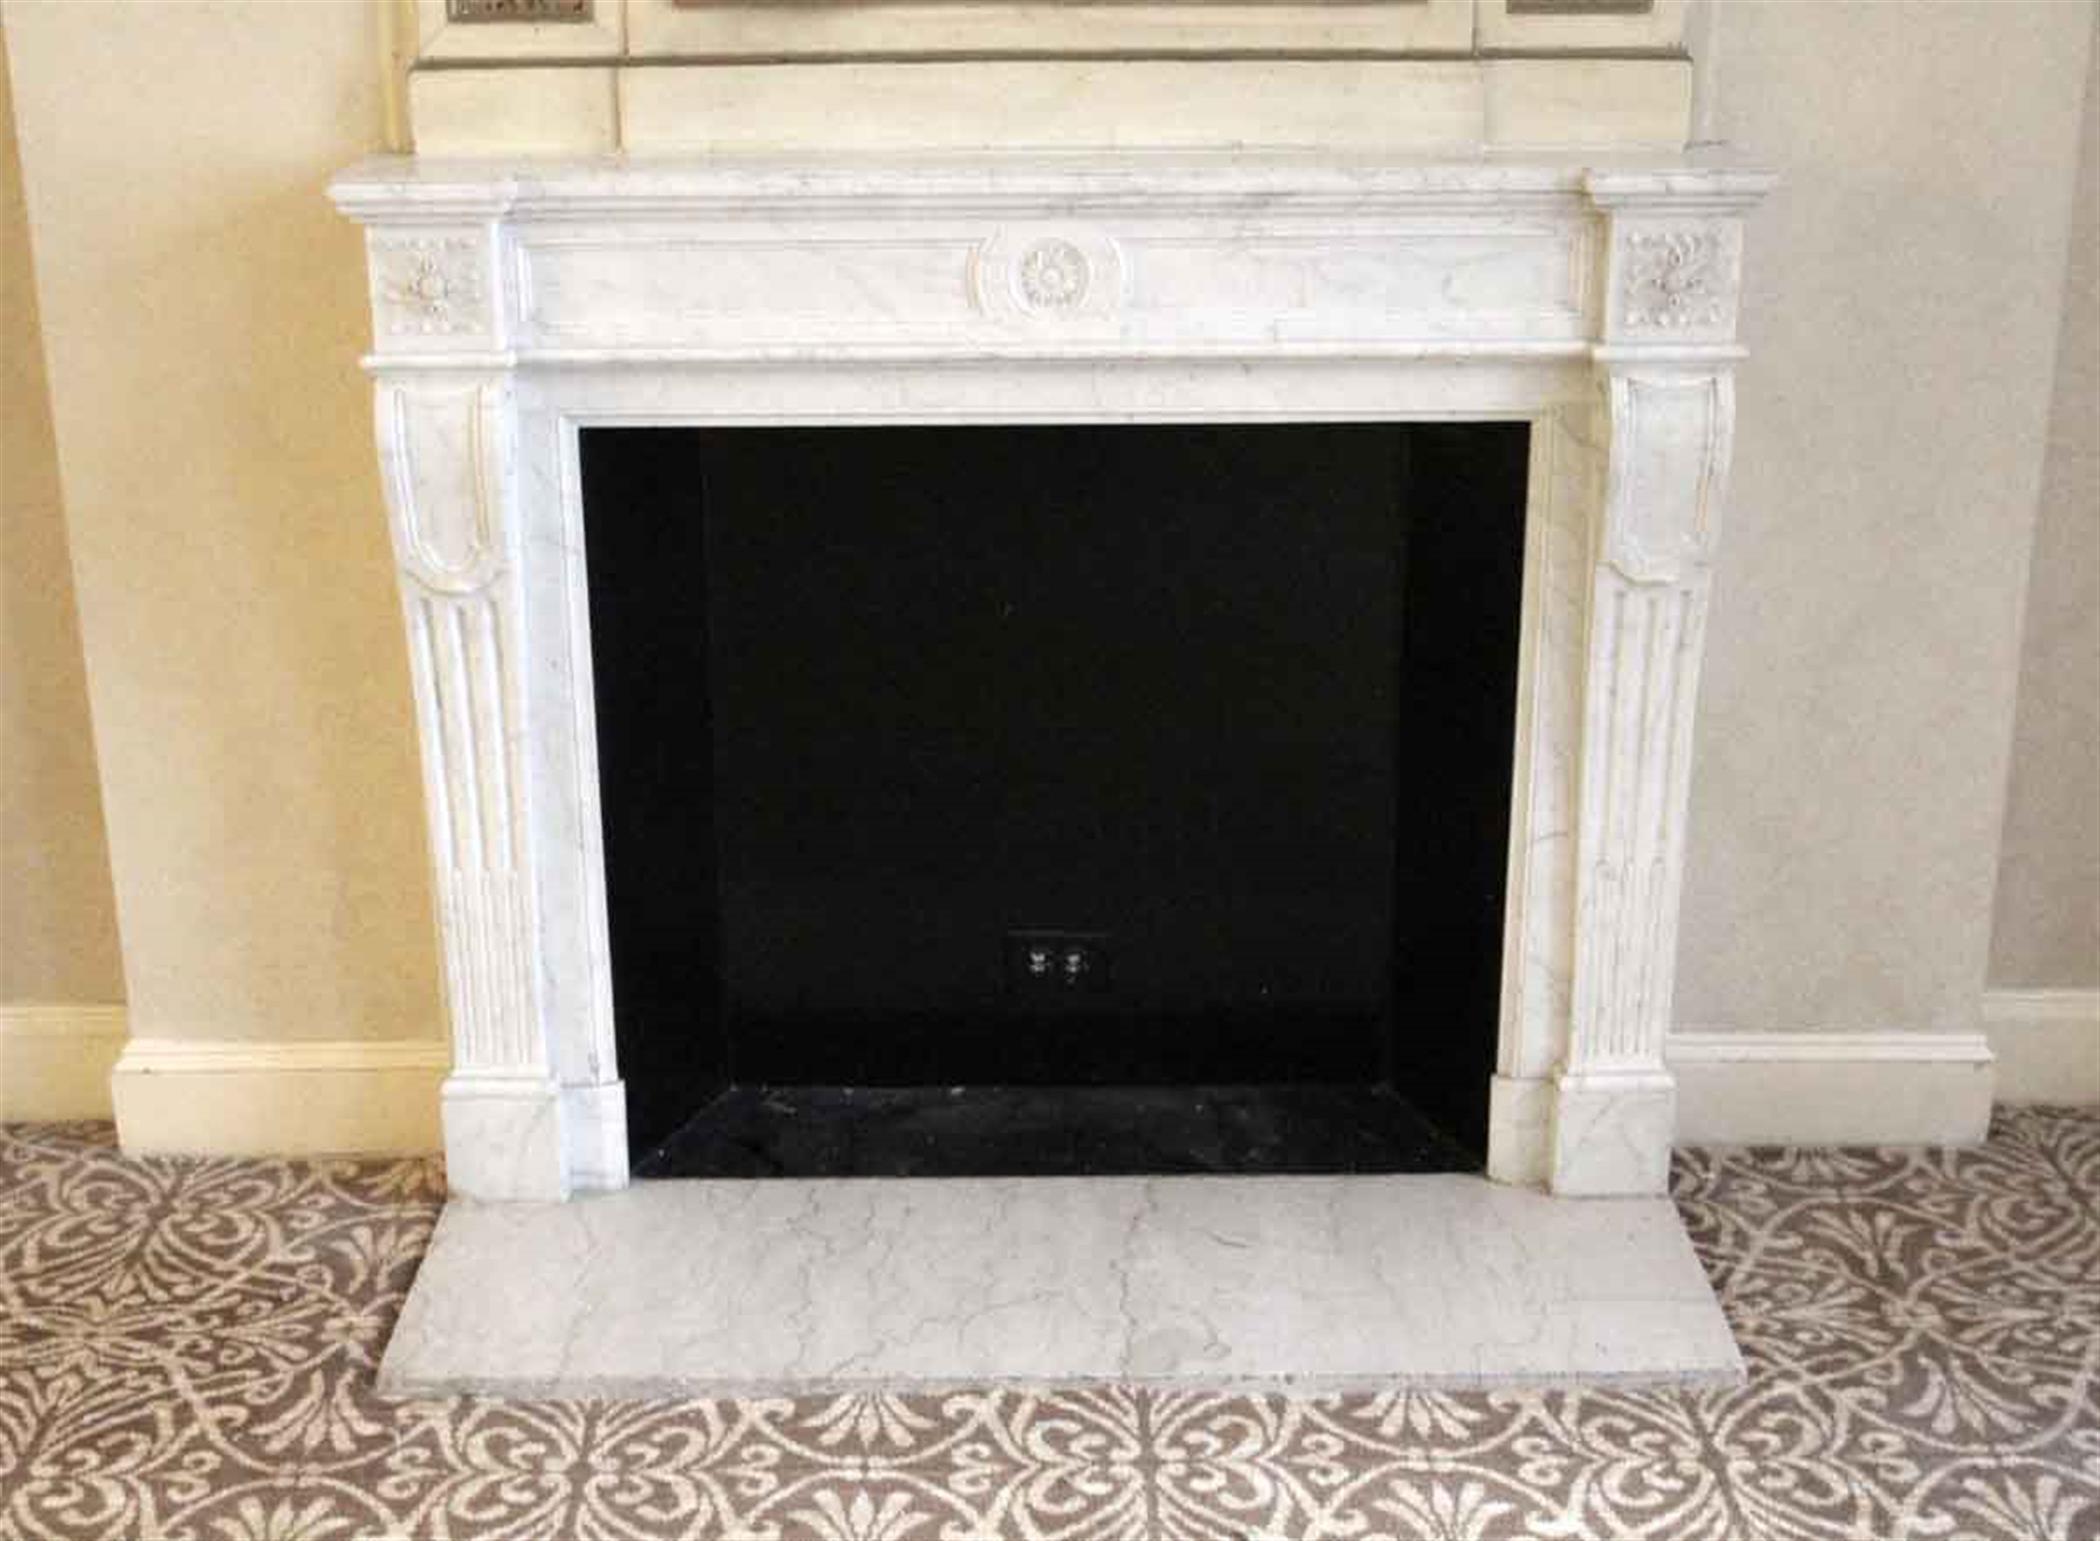 French Regency style white Carrara gray veined marble mantel with carved legs and floral motifs in the middle of the header and top plinths. This mantel was one of a group of antique mantels imported from France and installed in the NYC Waldorf